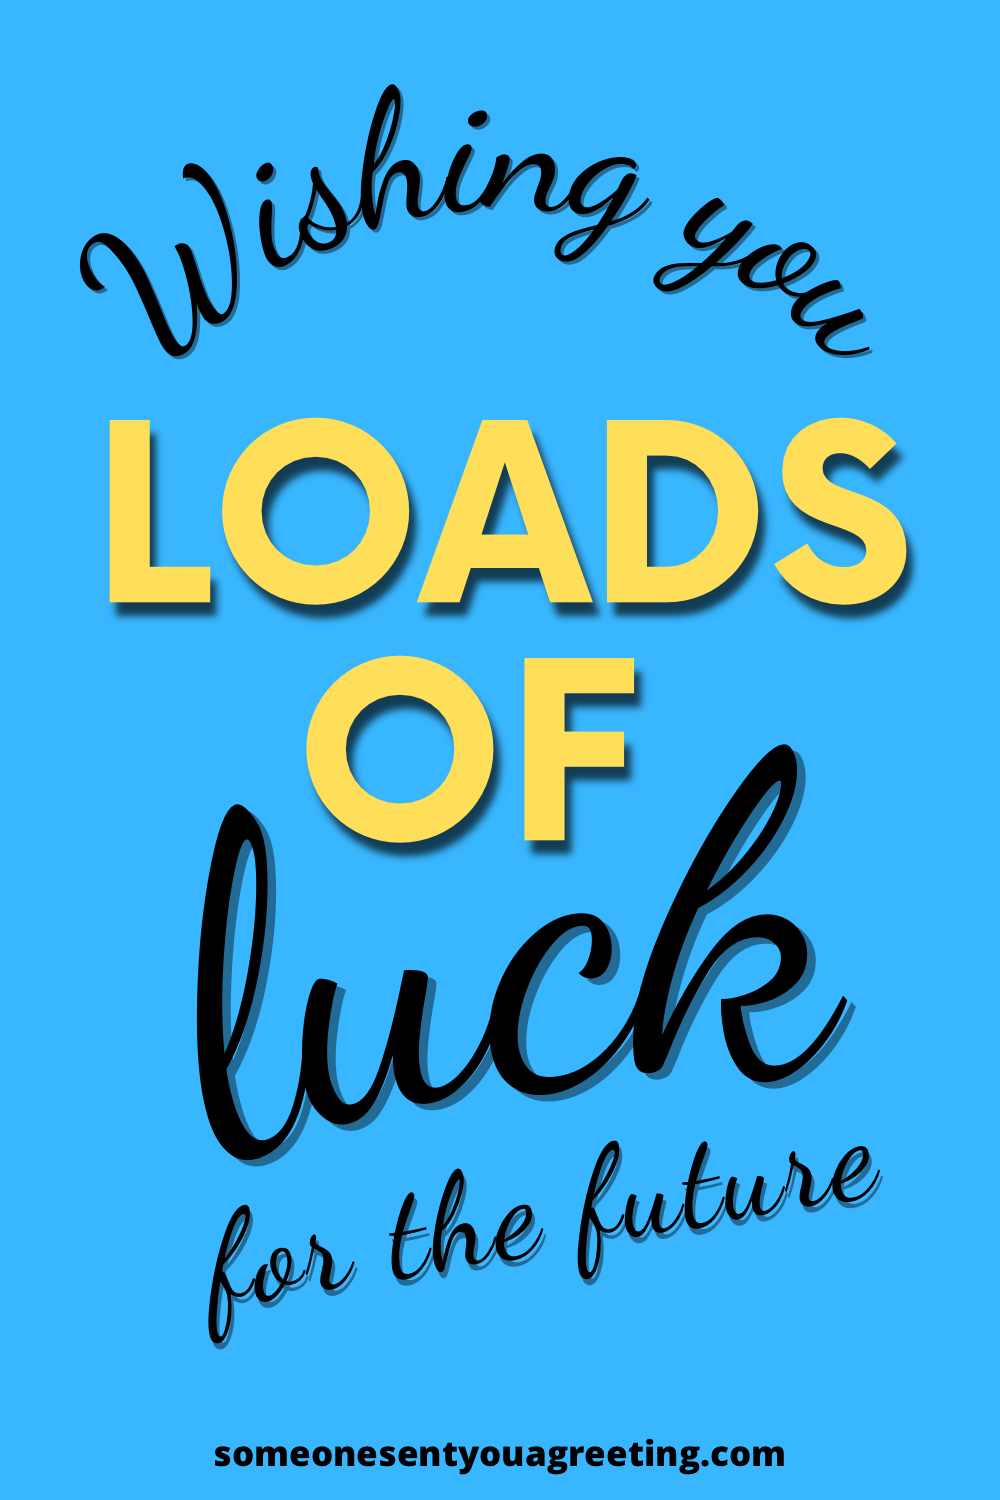 wishing you lots of luck for the future